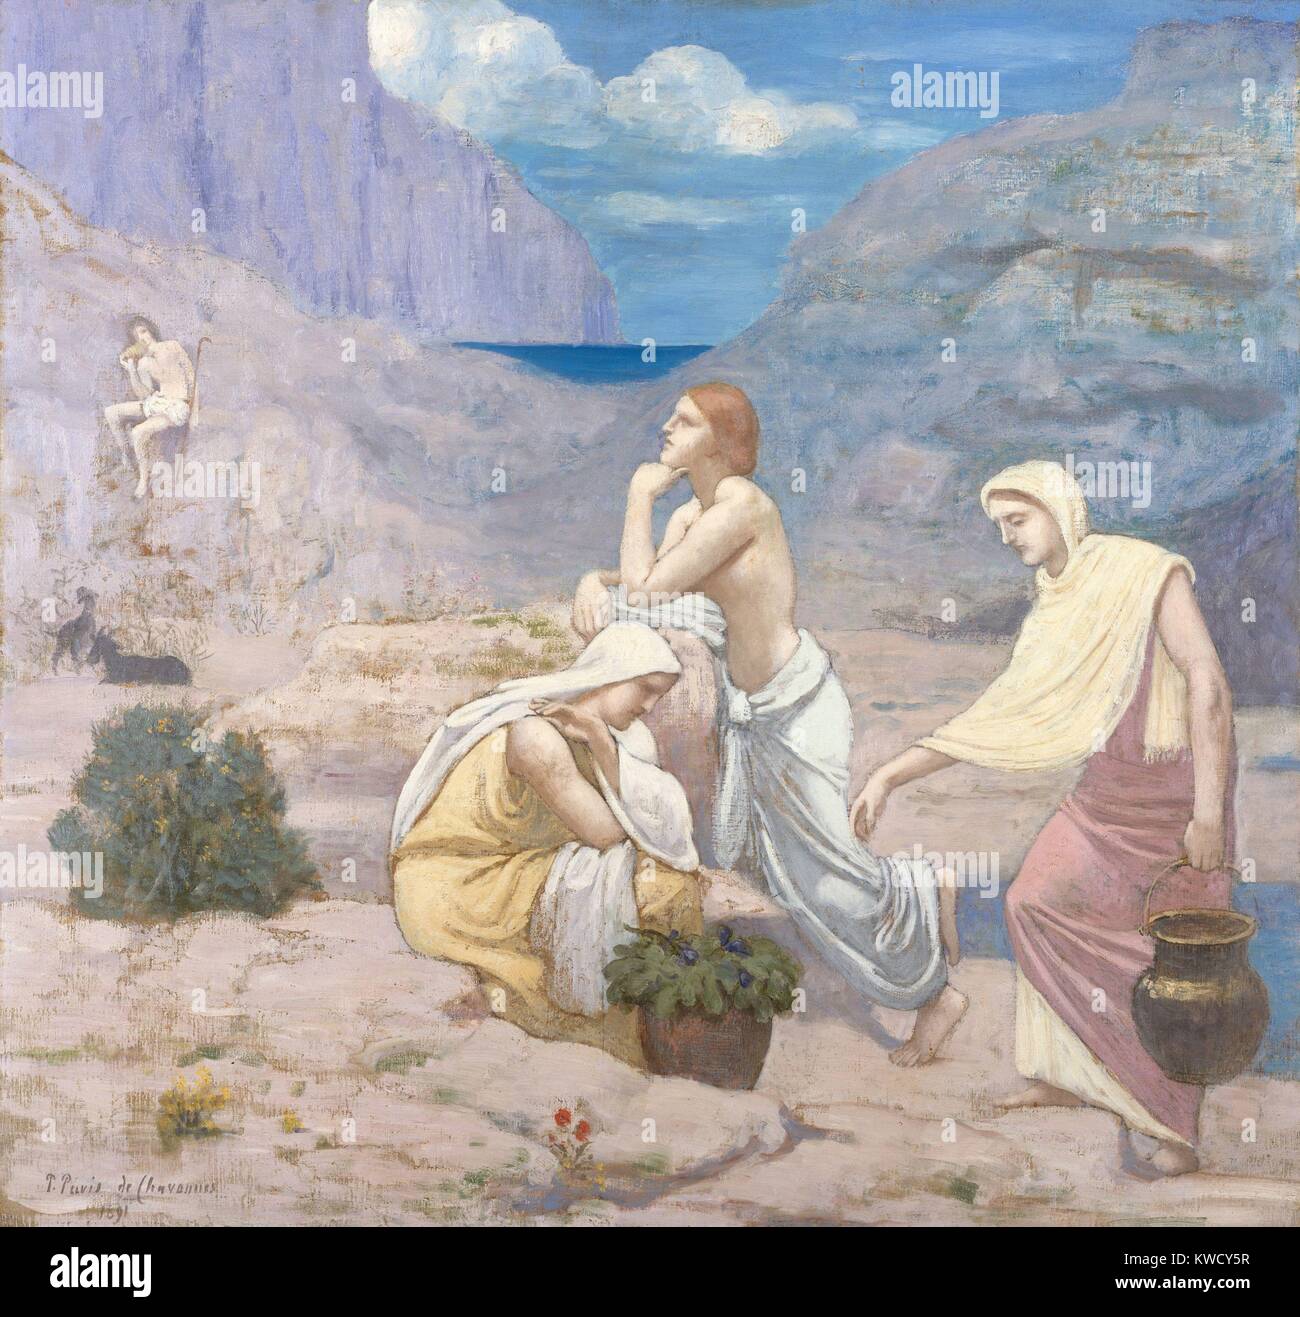 The Shepherds Song, by Pierre Puvis de Chavannes, 1891, French Romantic/Symbolist oil painting. The artist adapted his figures from Greco-Roman classical models and antique subjects, evoking a timeless dream world (BSLOC 2017 5 123) Stock Photo